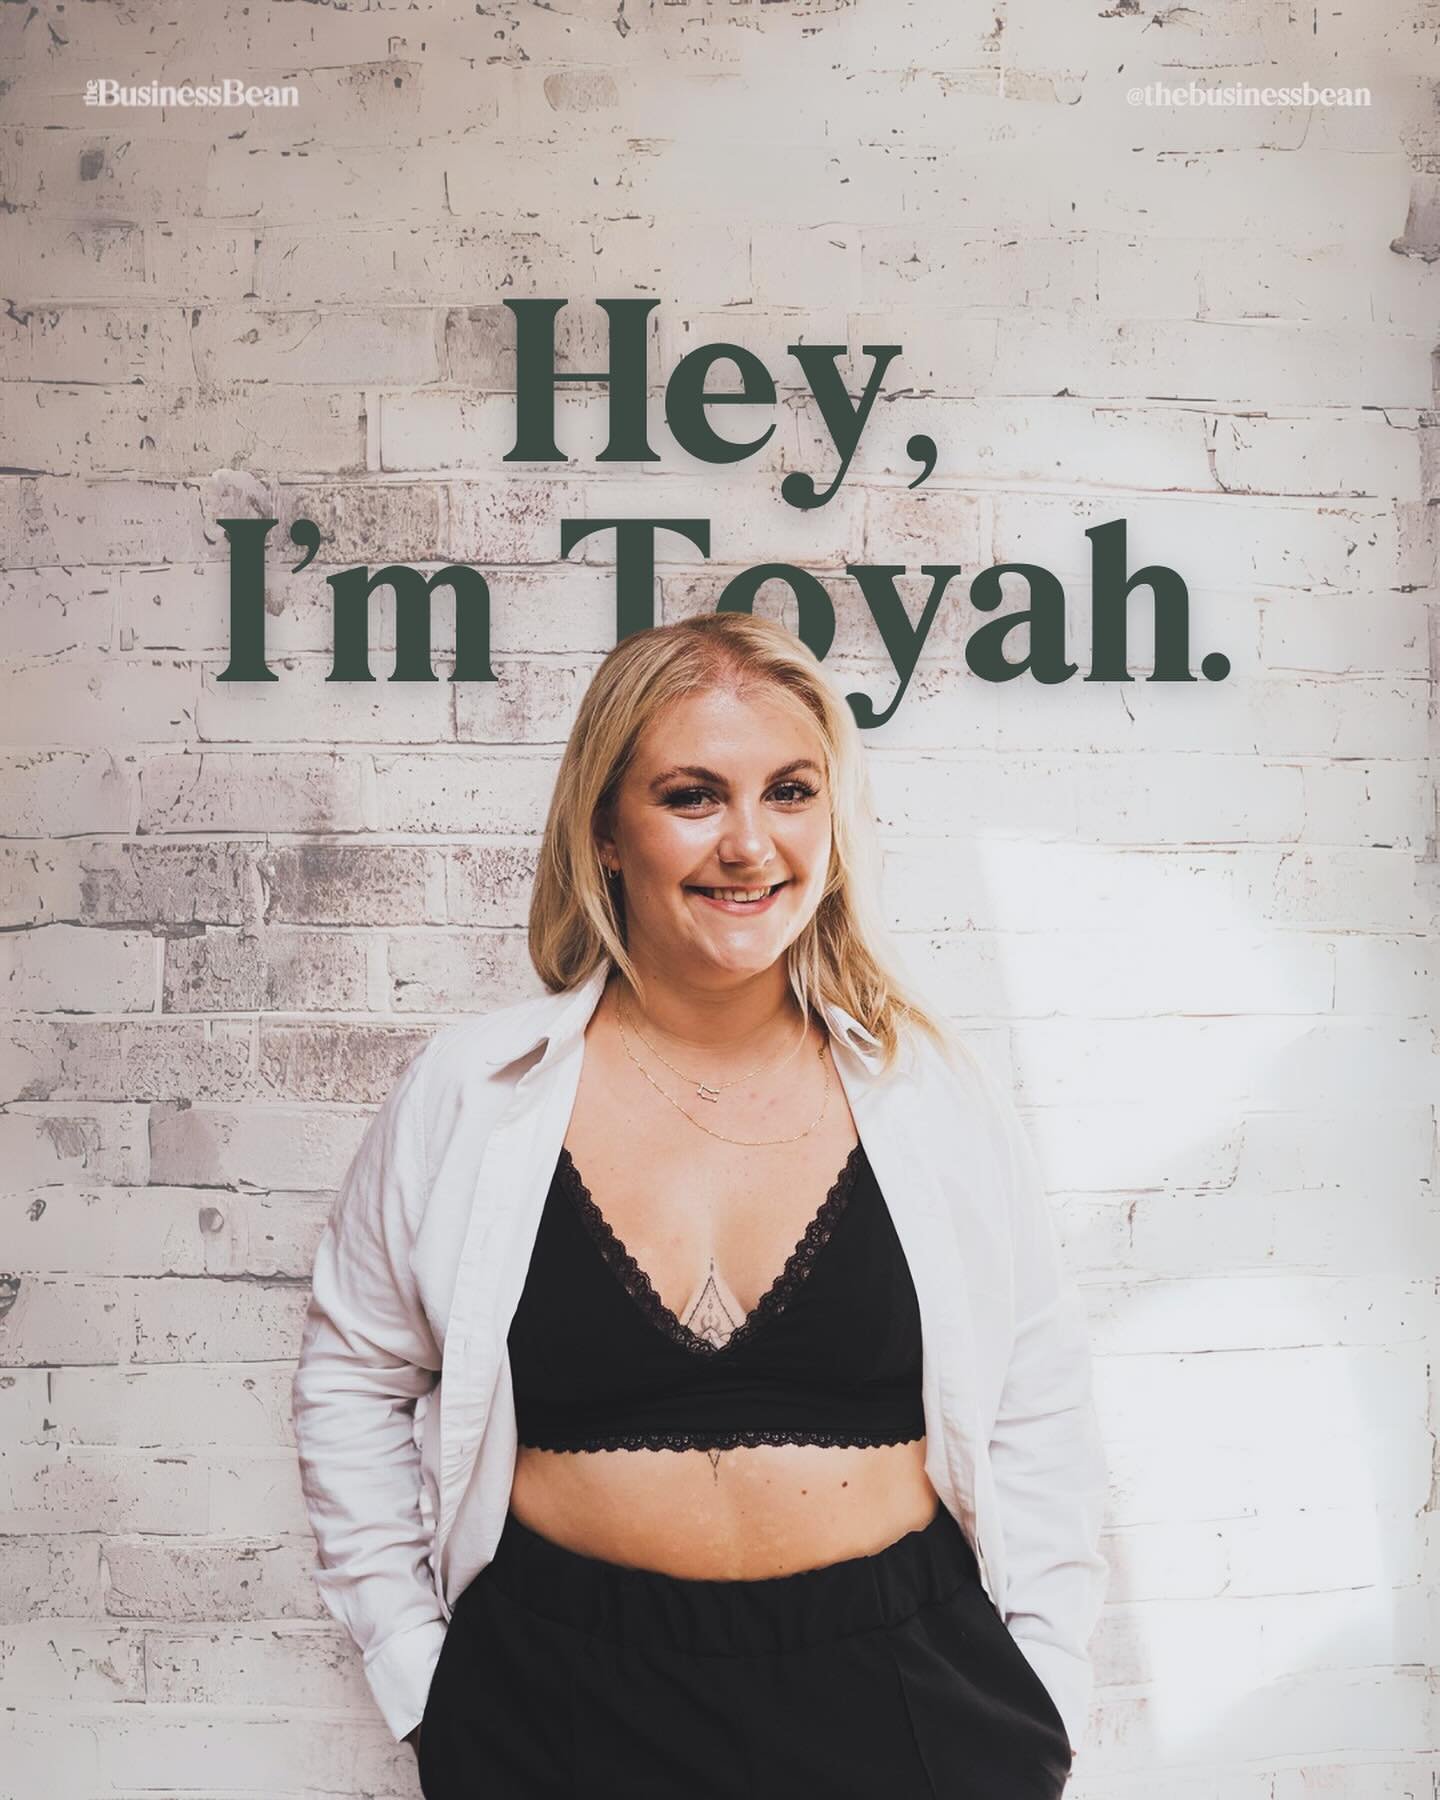 If you&rsquo;re new around here, let&rsquo;s see if we&rsquo;re gonna get along 🫶🏼

If you swipe you&rsquo;ll find some businessey facts.. But here&rsquo;s a bit more about the girl behind the biz. 

Hey 👋🏻 I&rsquo;m Toyah, a Squarespace &amp; Du